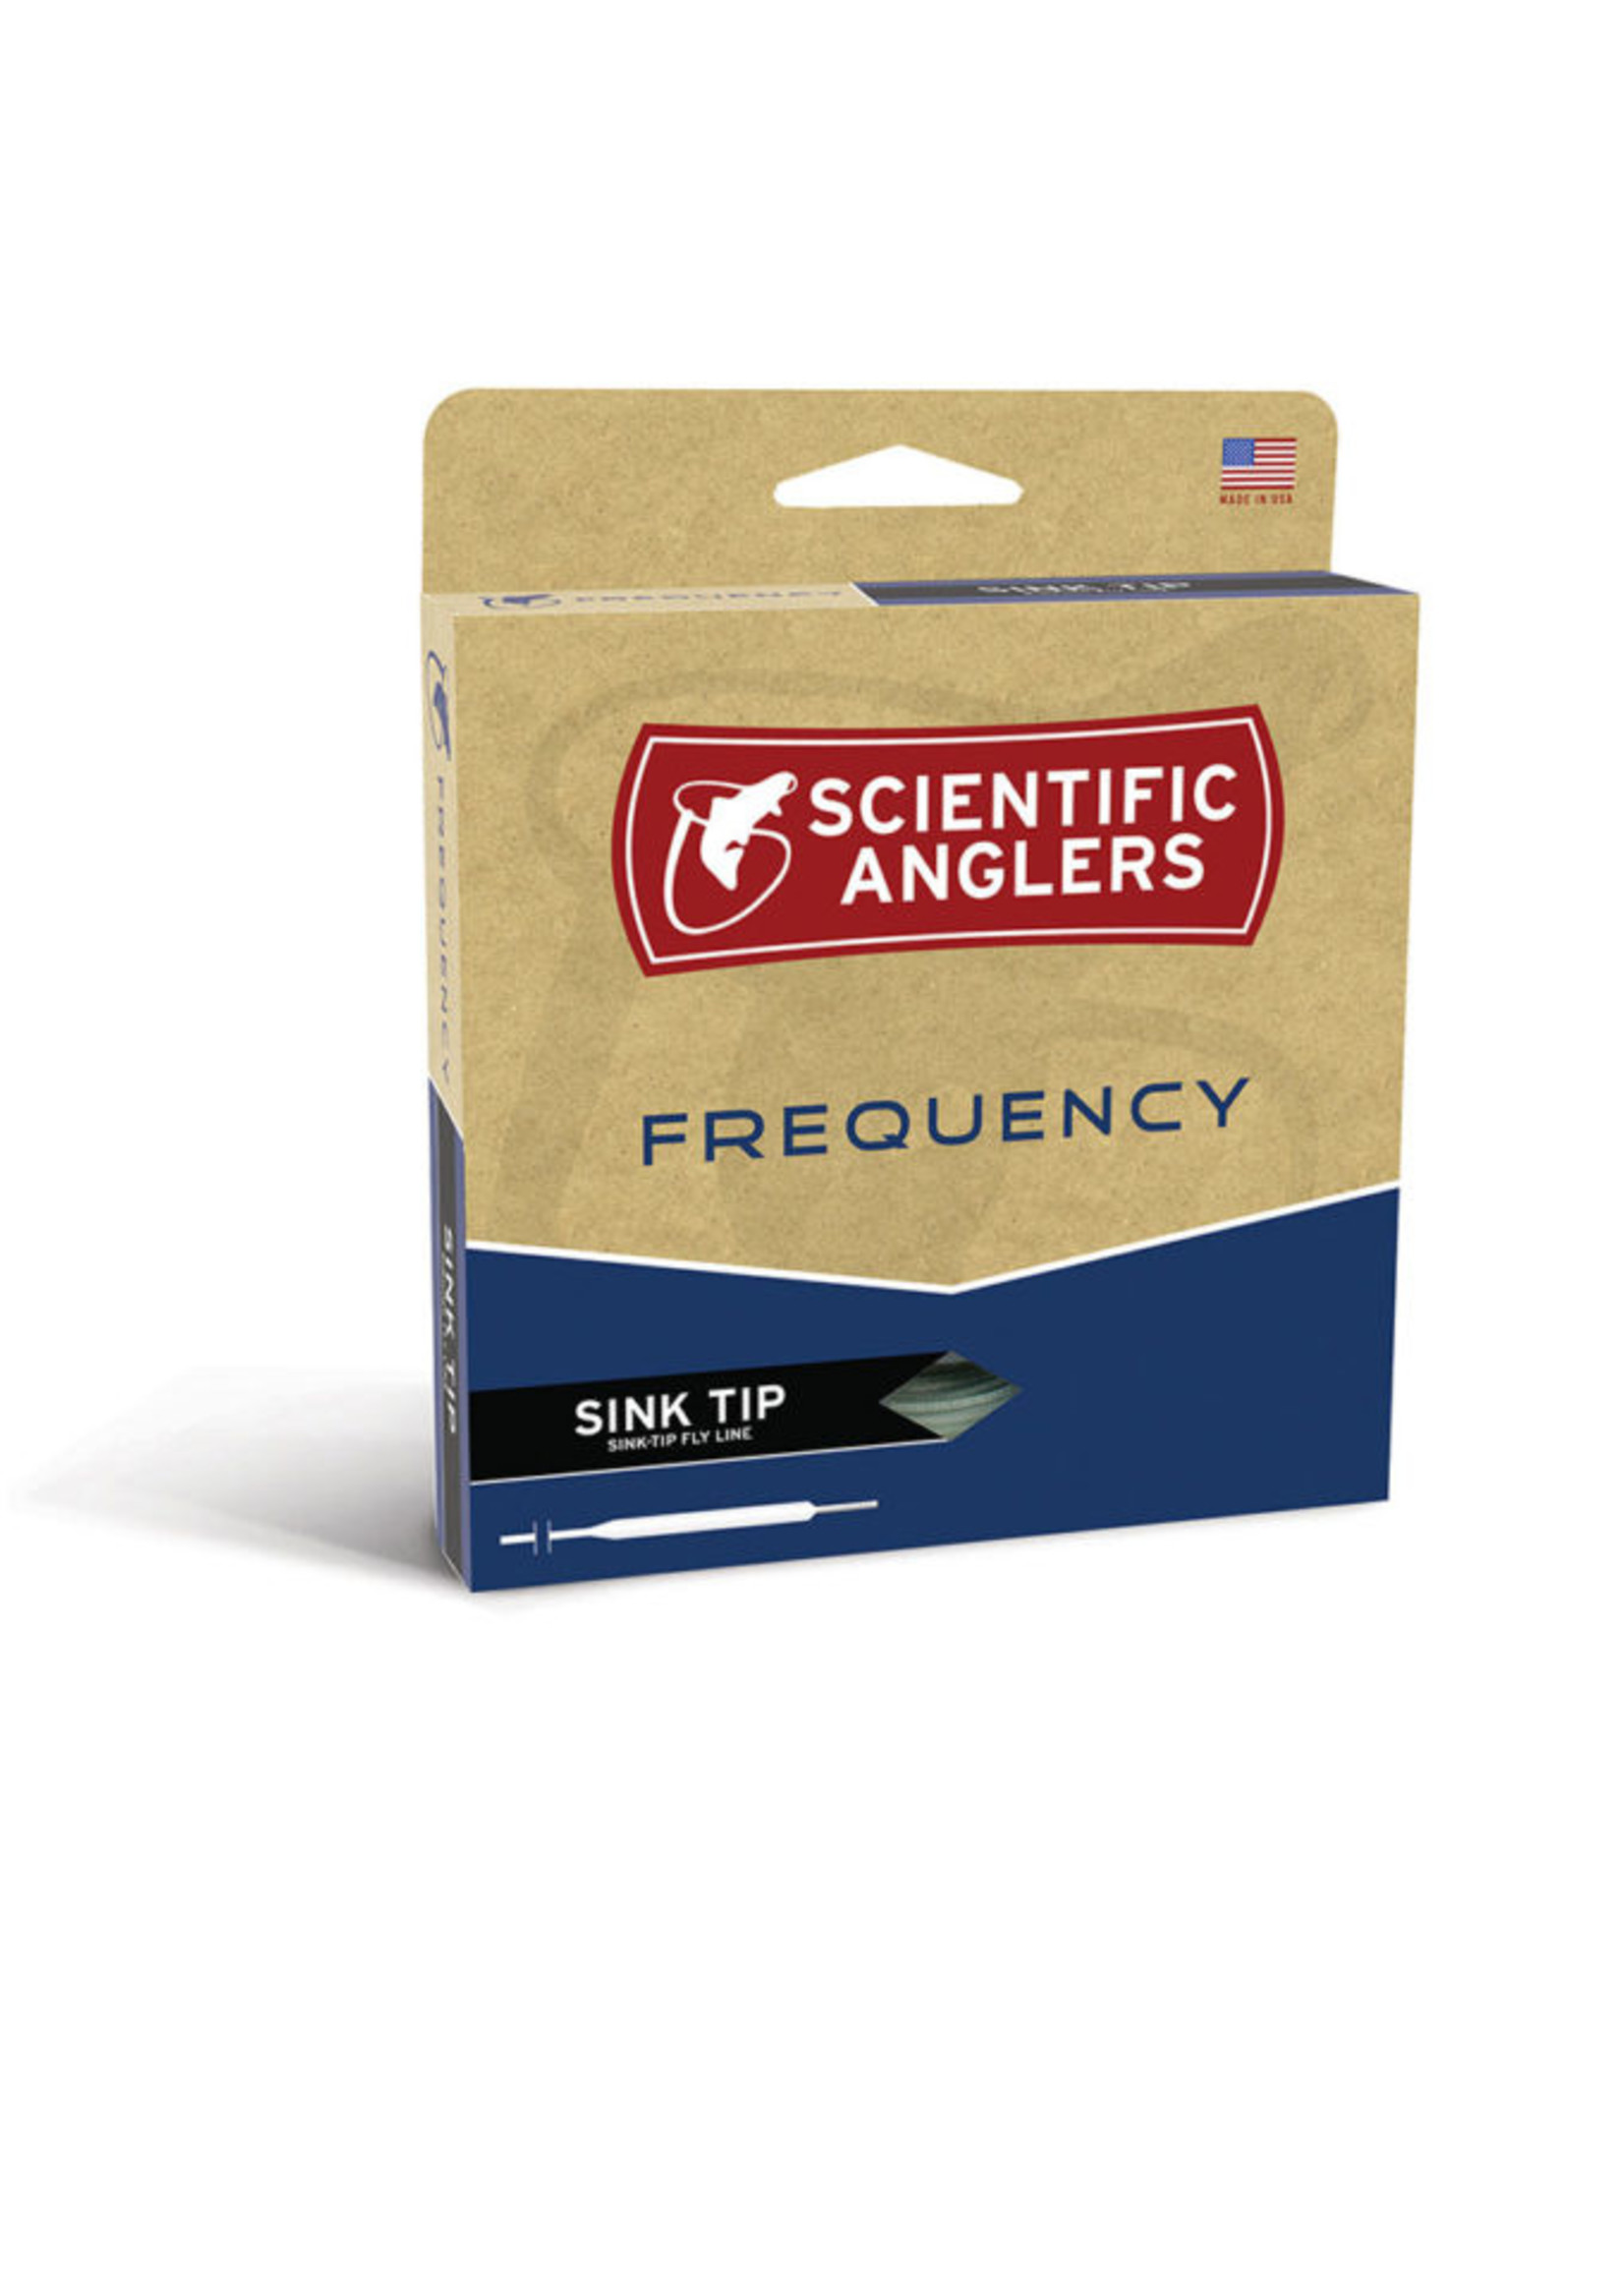 Scientific Anglers Scientific Anglers Frequency Sink Tip Fly Line